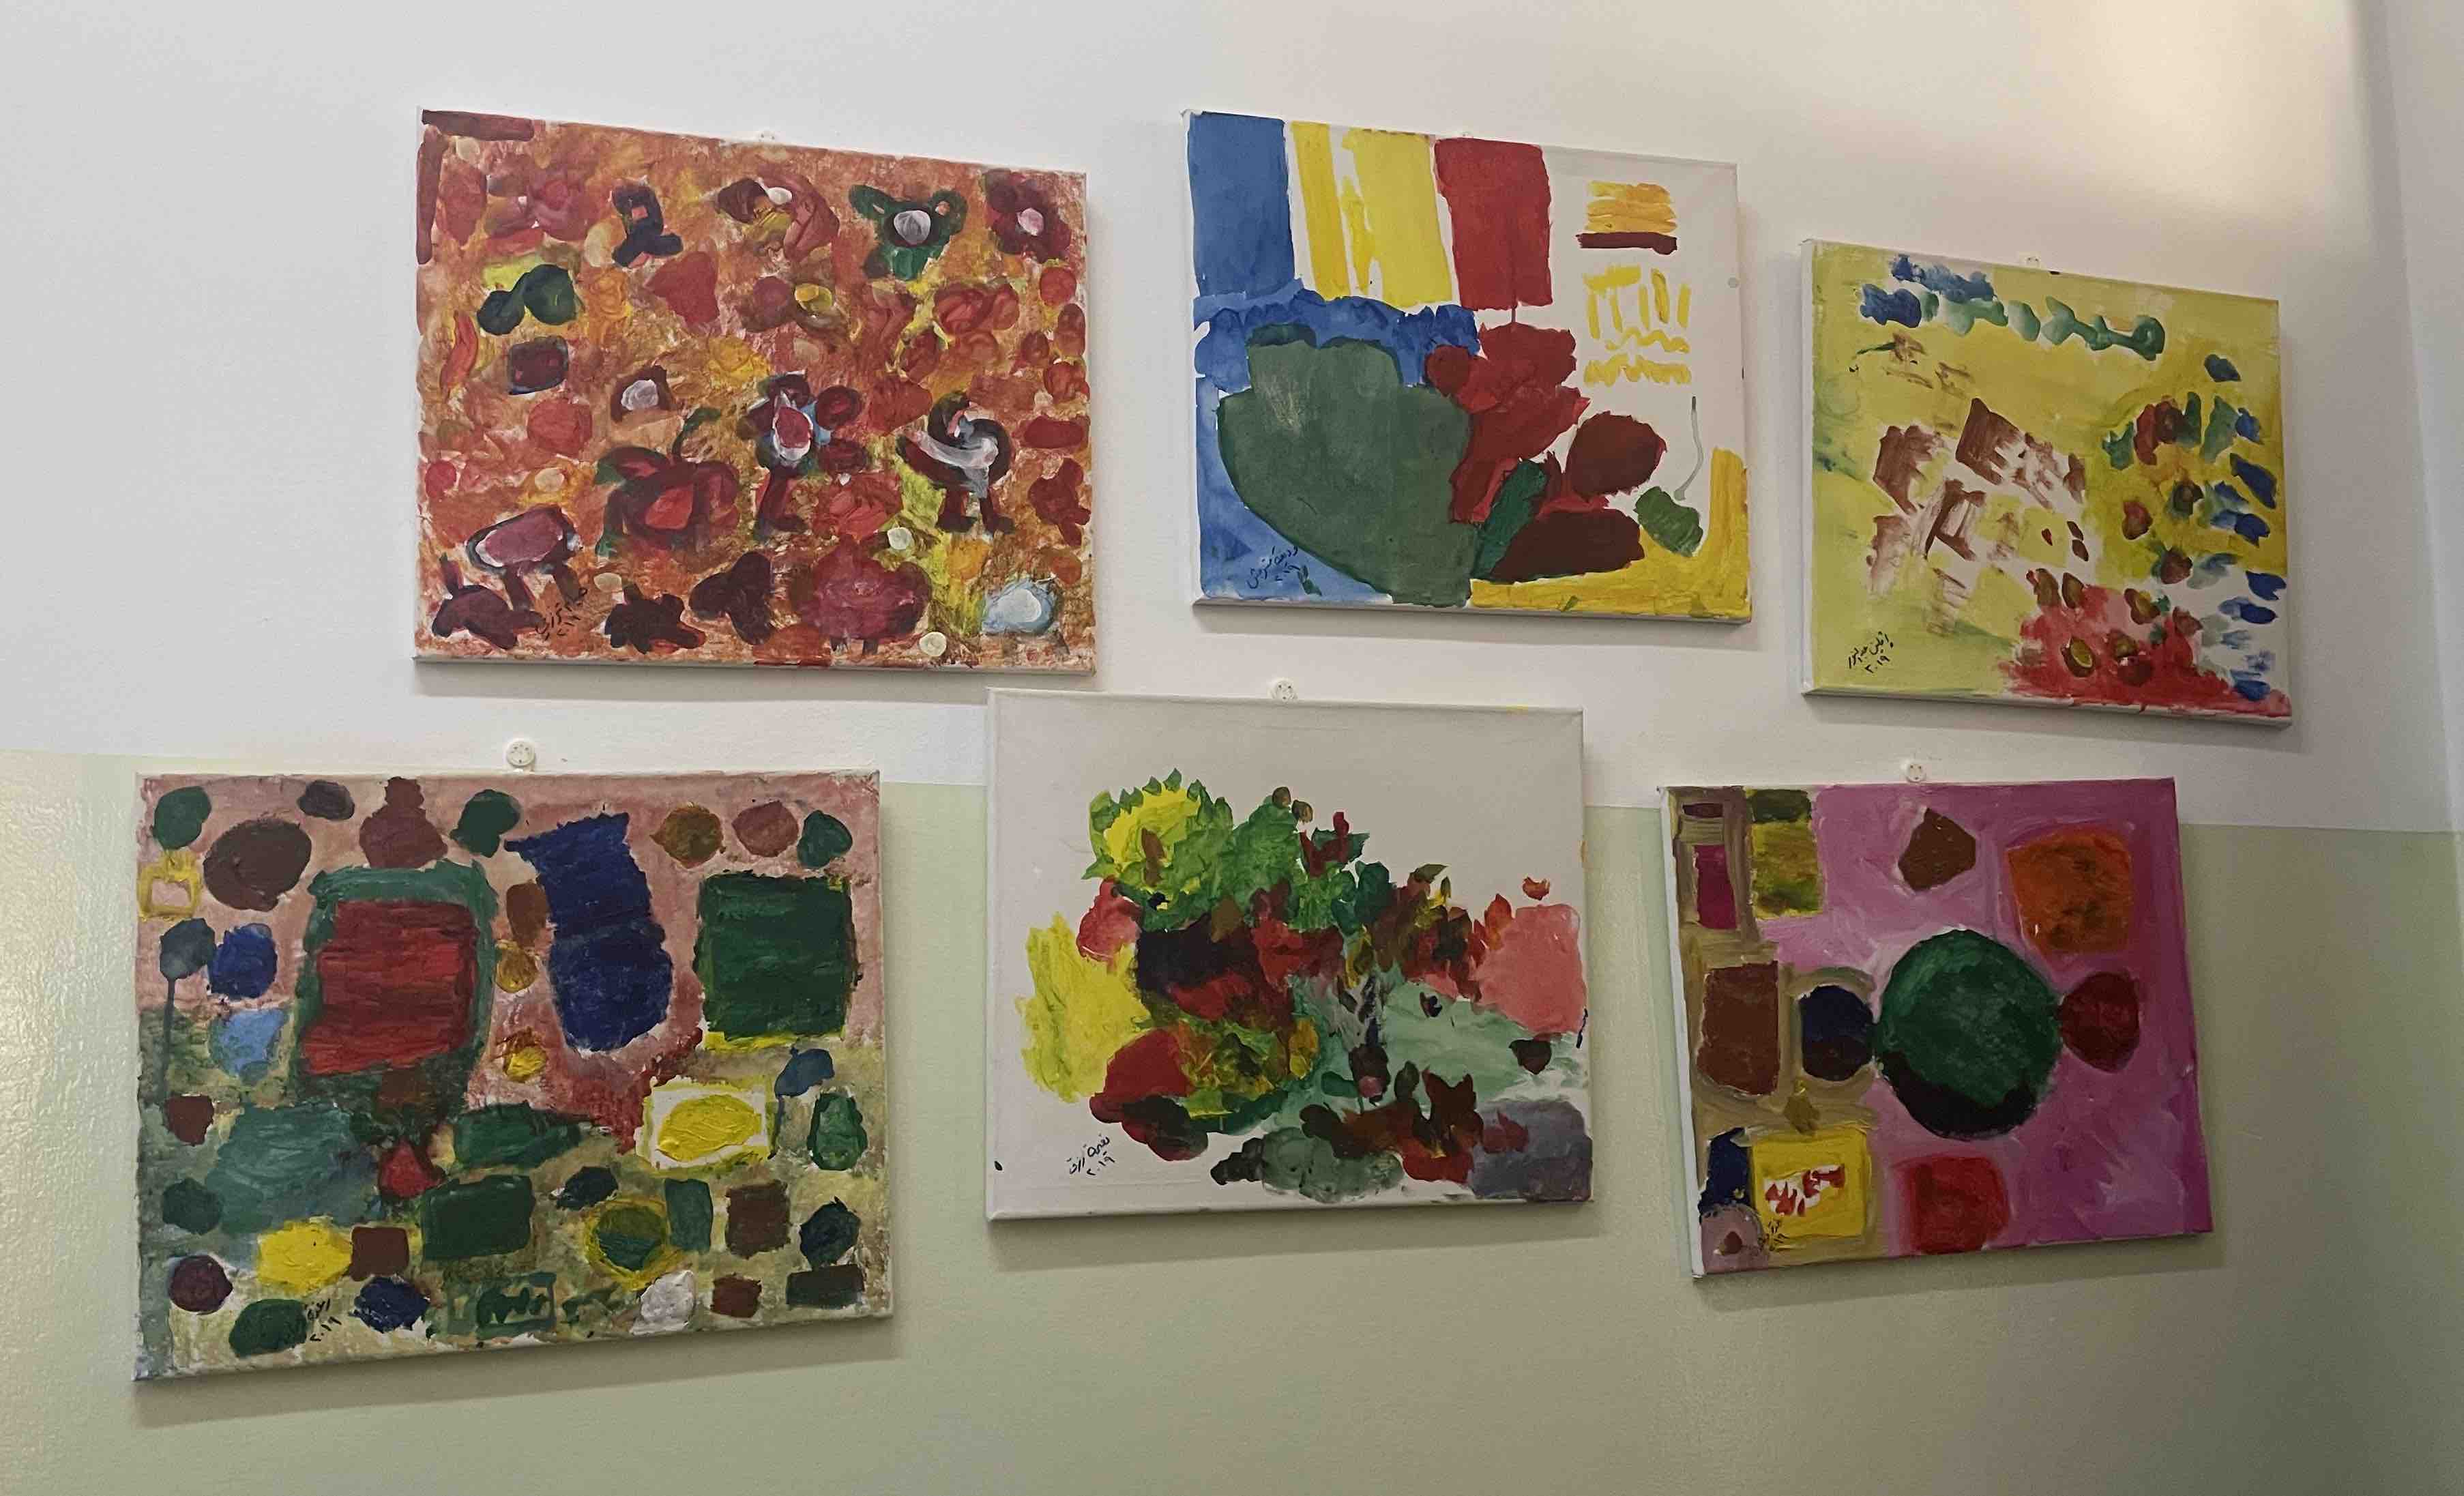 Artwork from an exhibition in the elder residence facility at St Paul's.